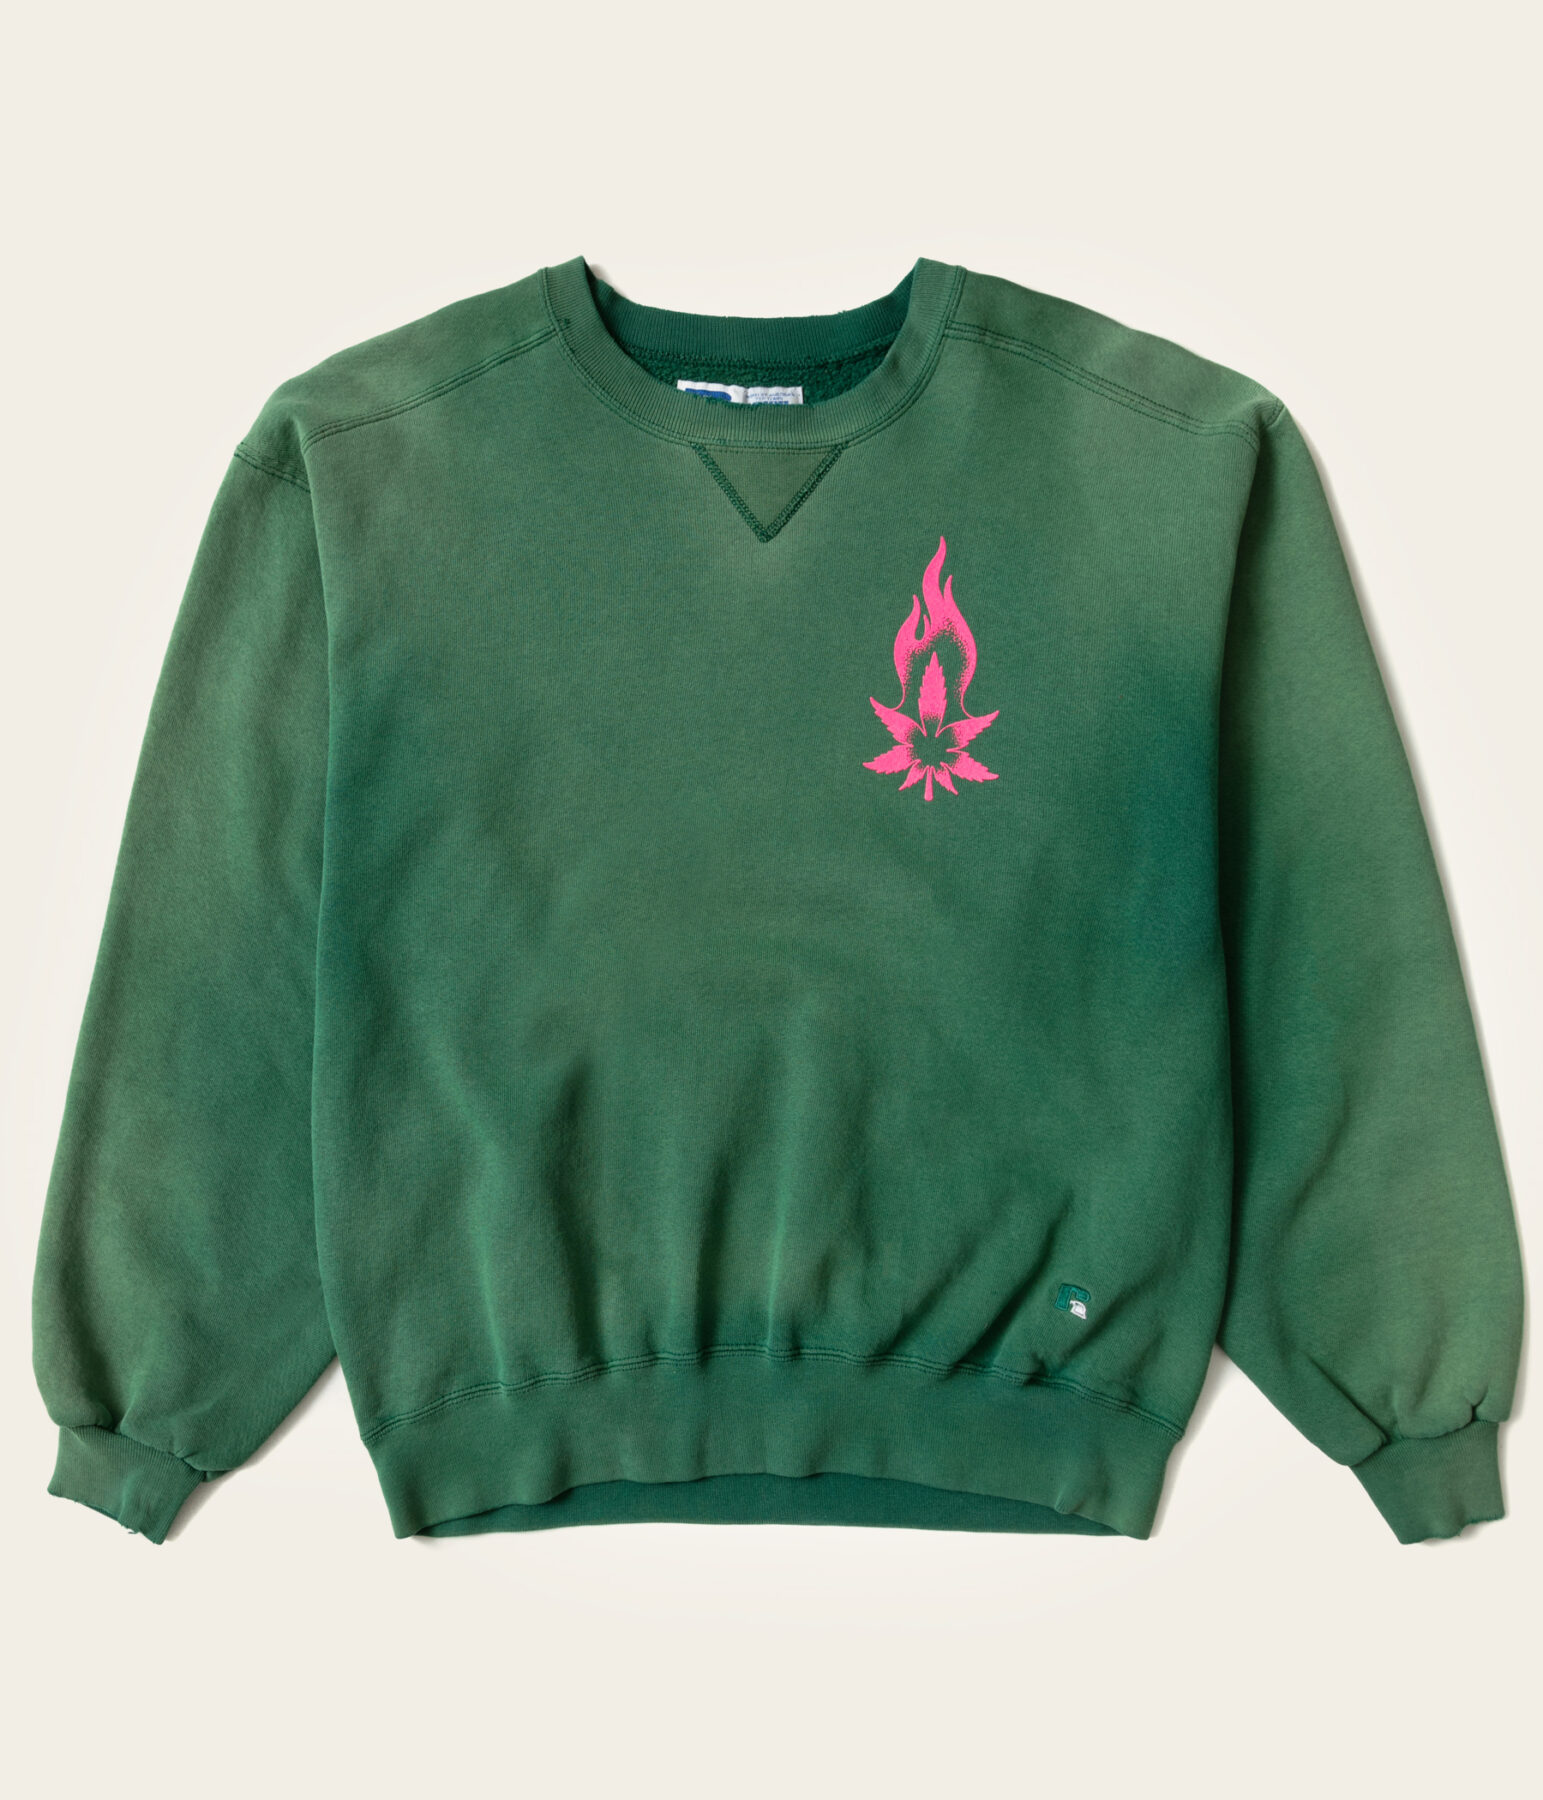 Green crewneck with flame graphic